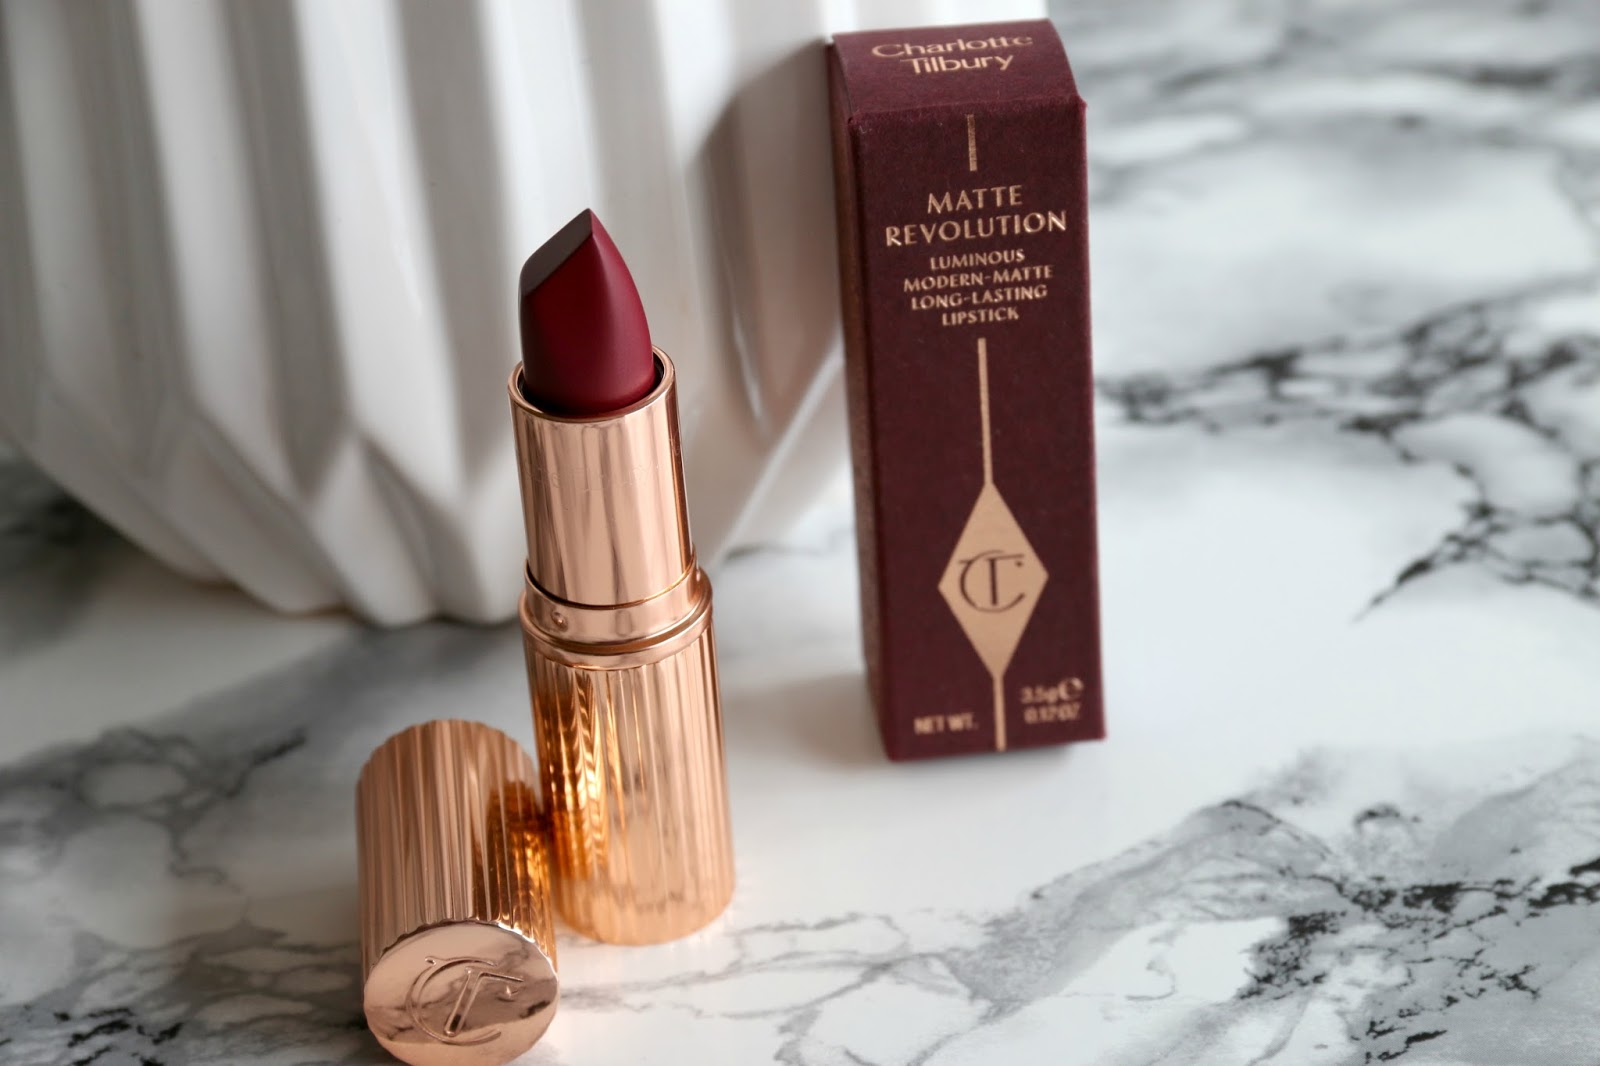 Charlotte Tilbury Lipstick in Love Liberty Review